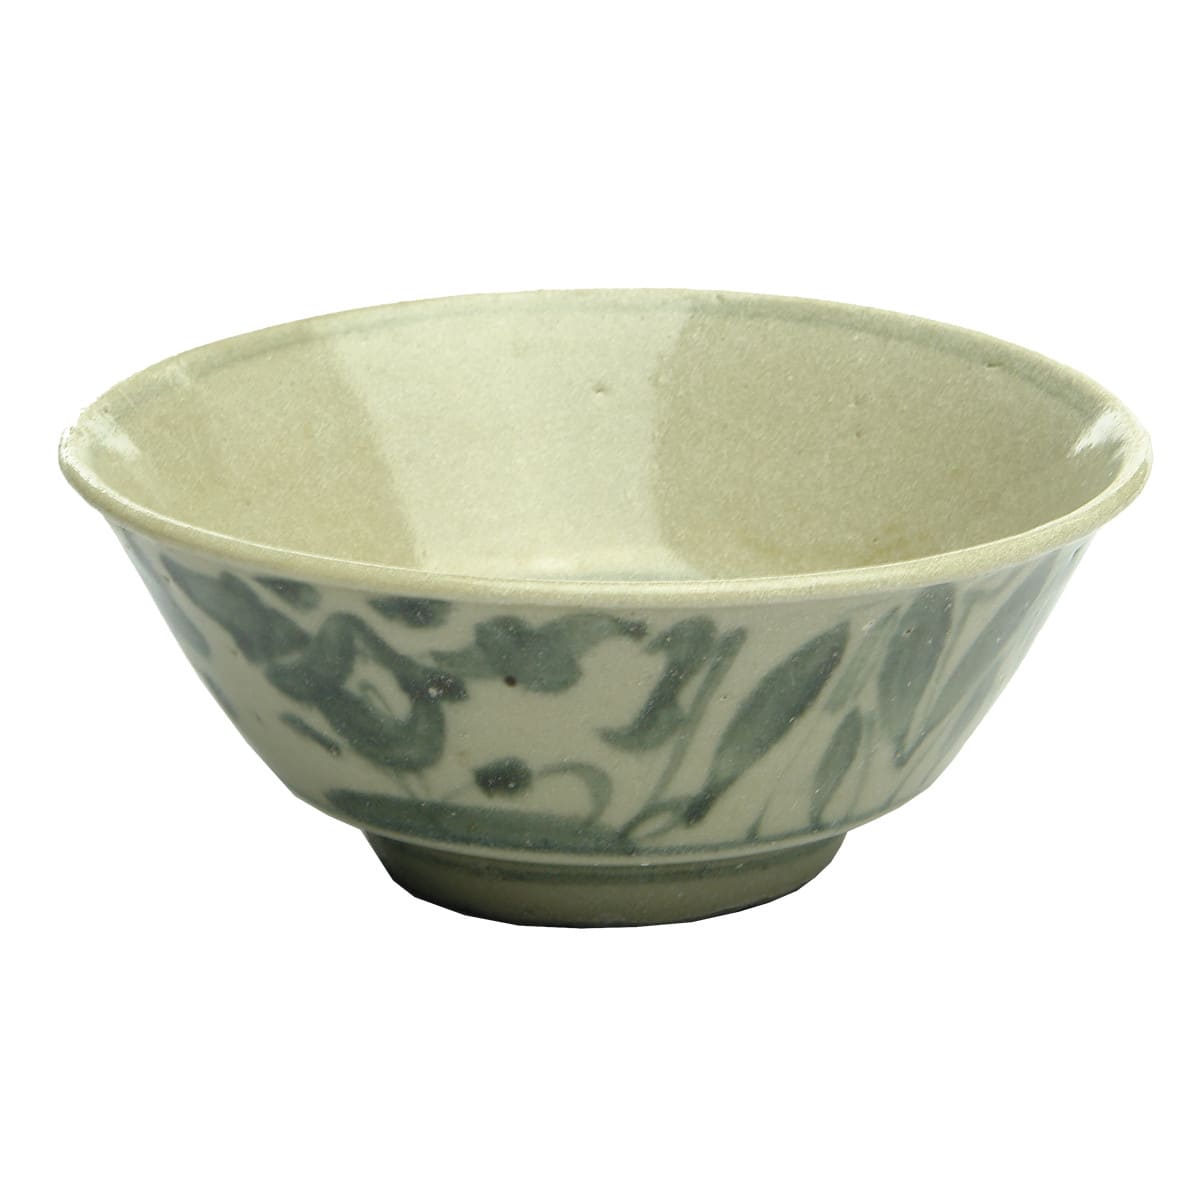 Chinese Pottery Bowl. Floral brushstroke decoration.